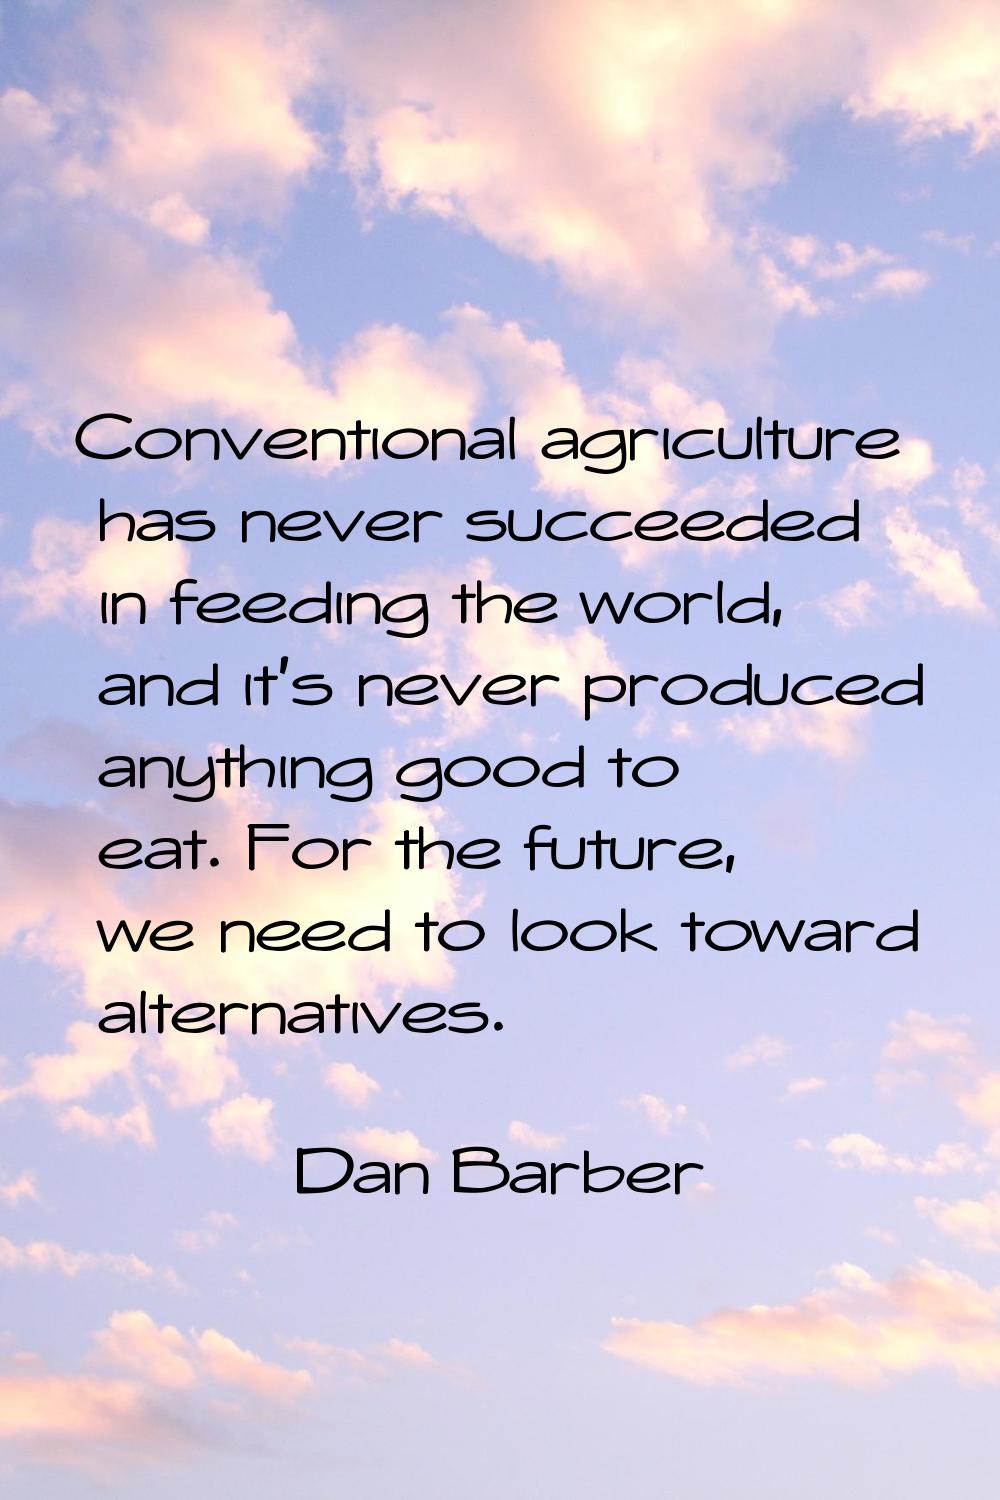 Conventional agriculture has never succeeded in feeding the world, and it's never produced anything